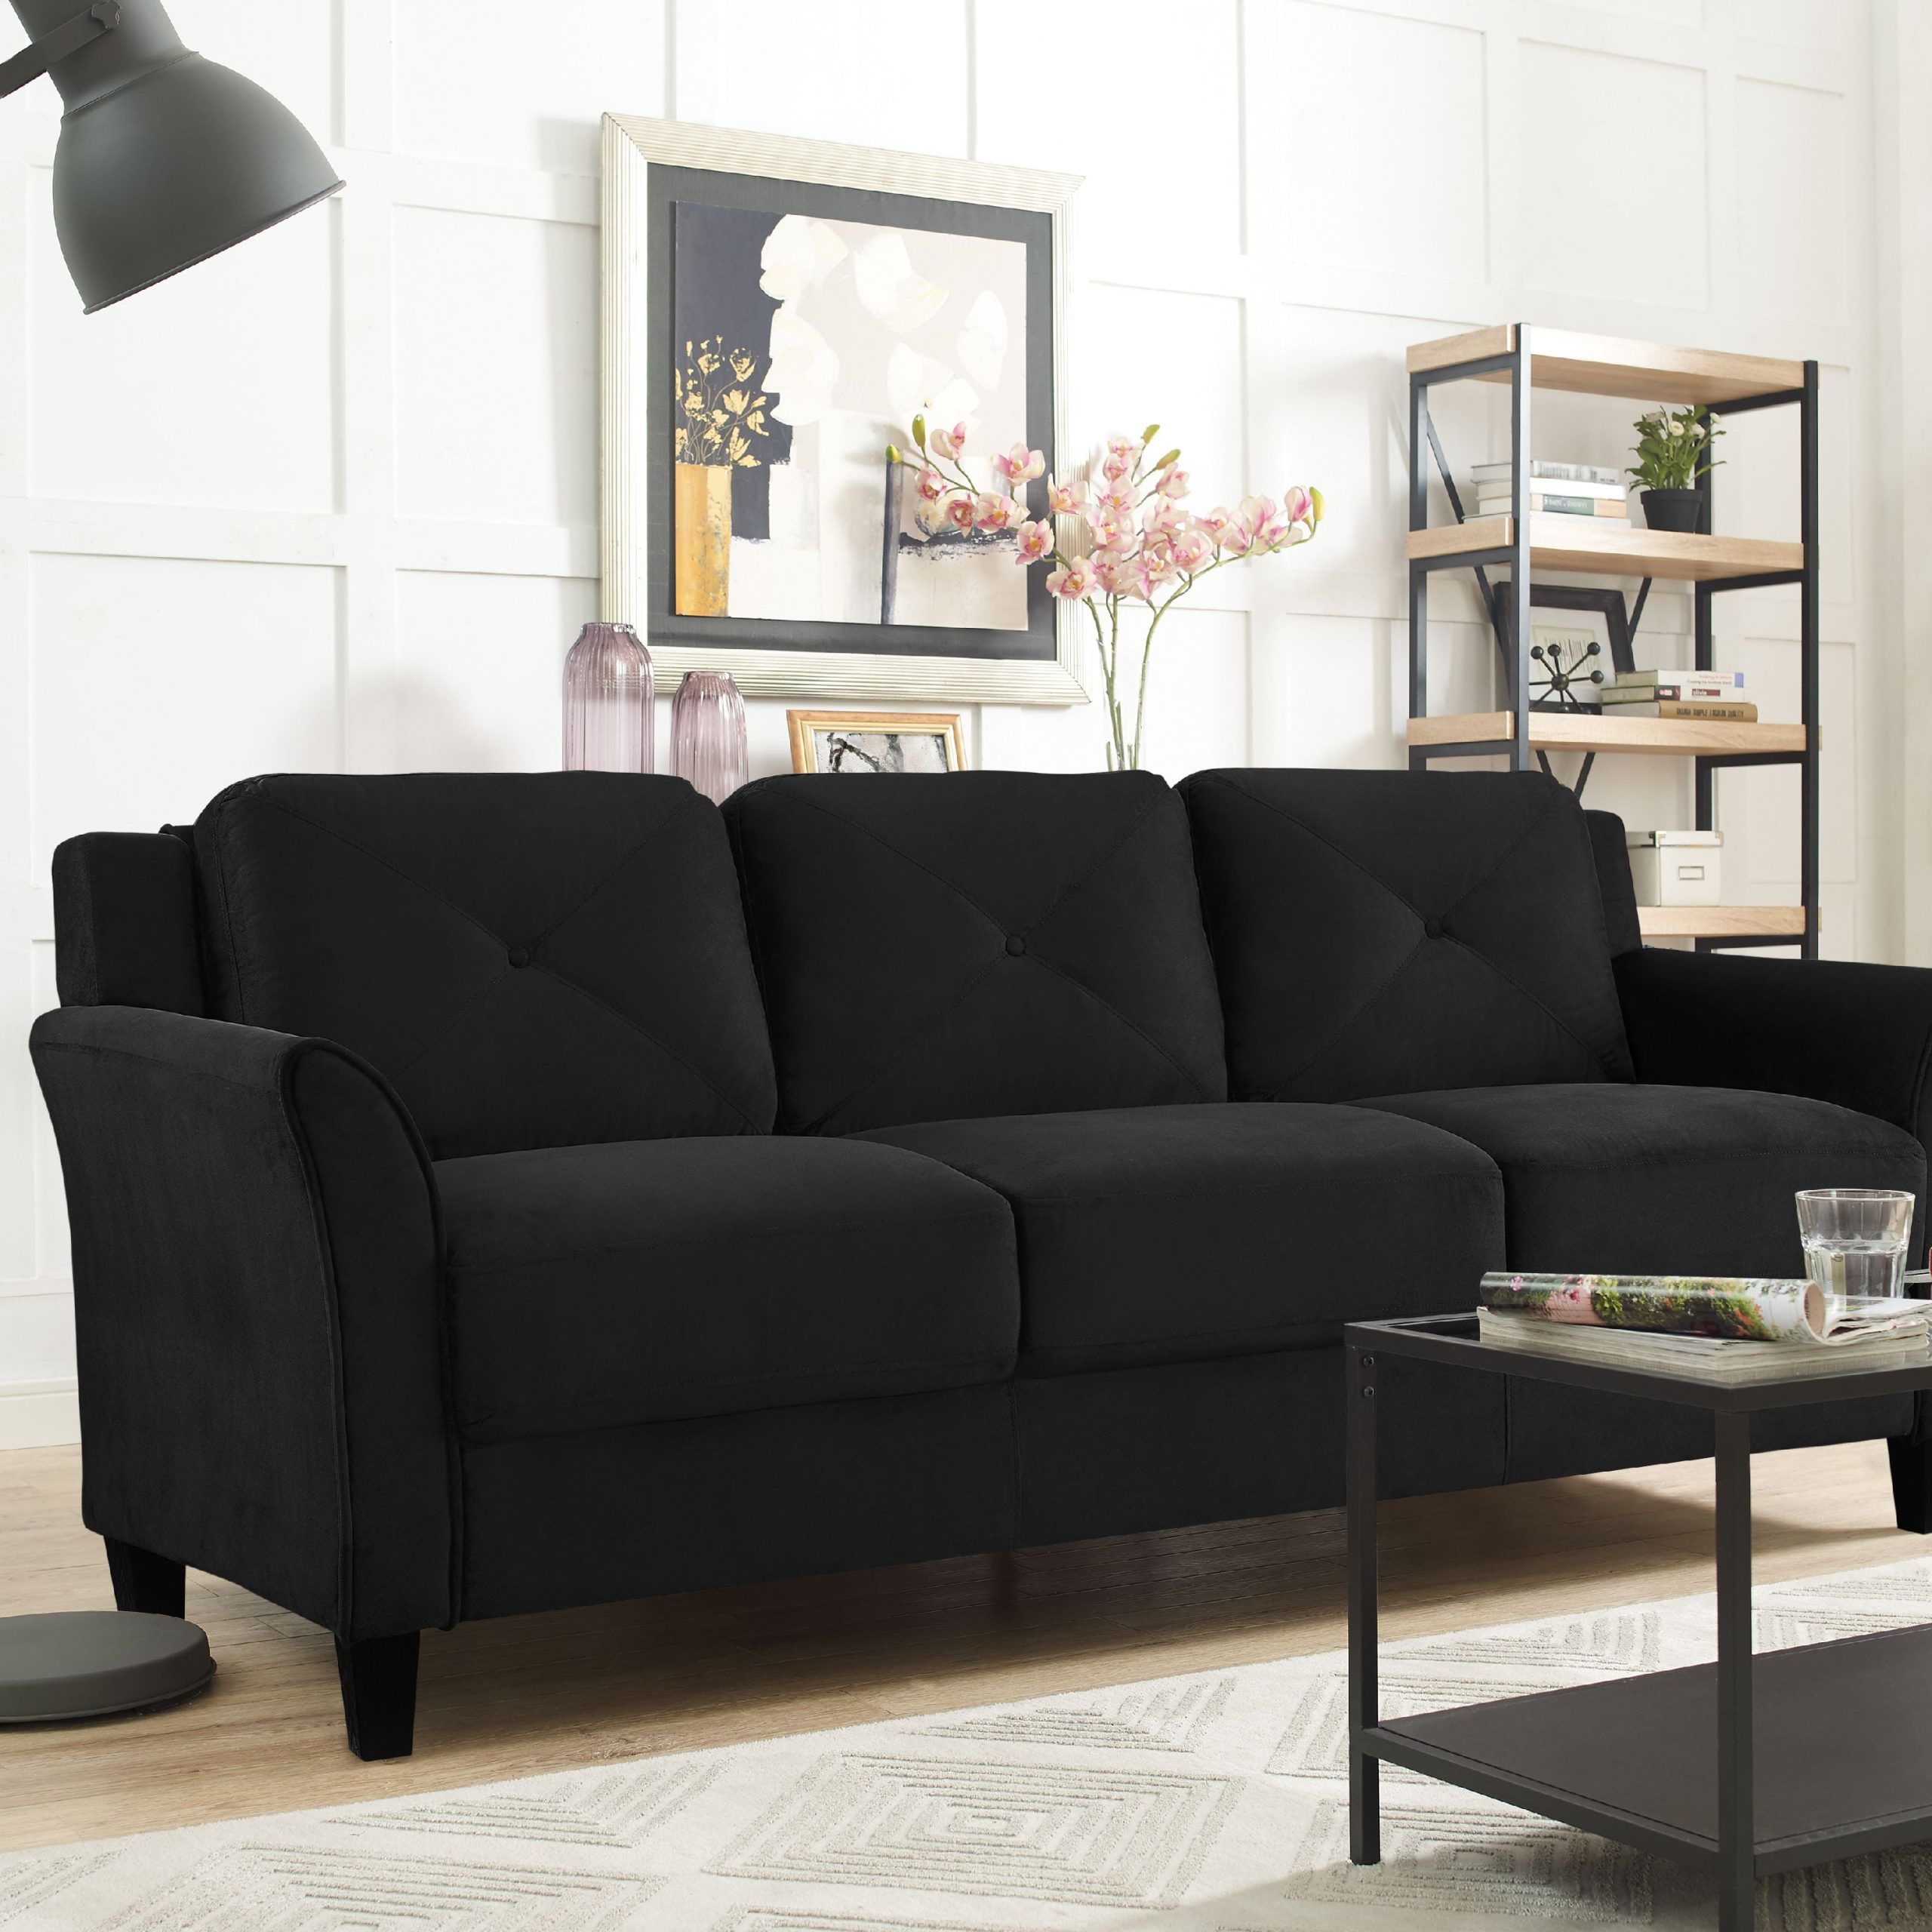 Lifestyle Solutions Taryn Curved Arm Fabric Sofa, Black – Walmart With Sofas With Curved Arms (Gallery 4 of 20)